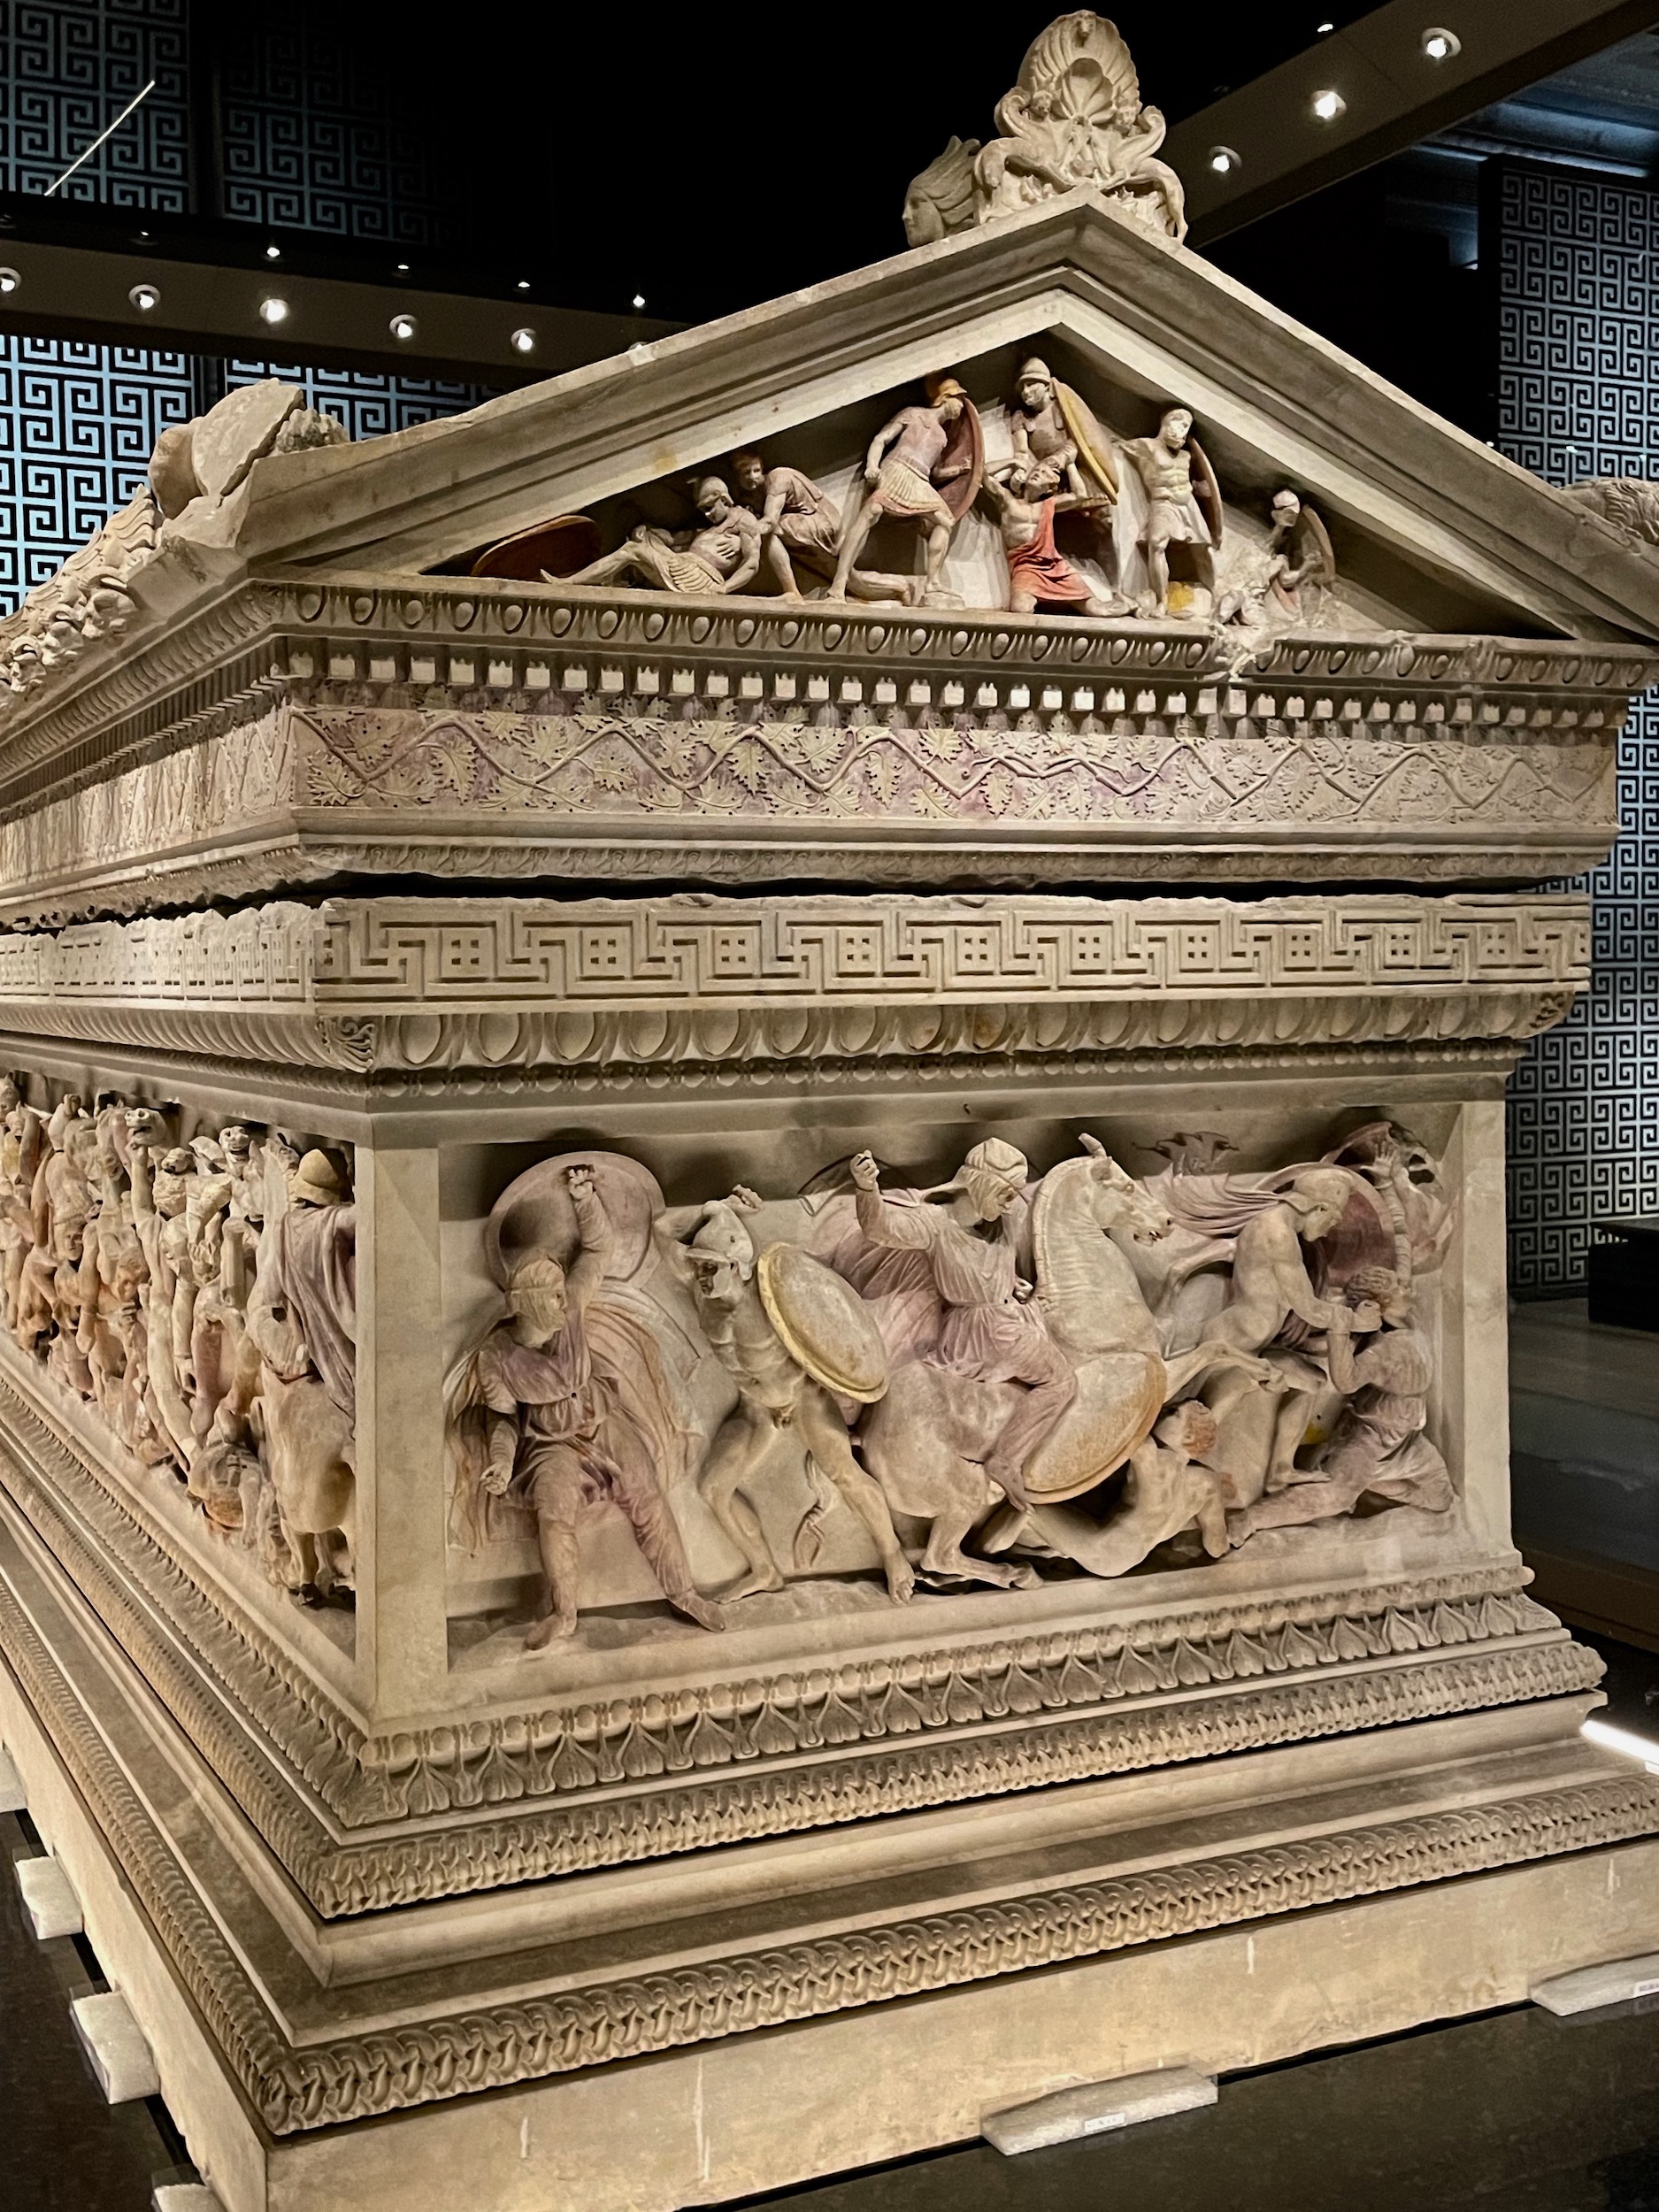 Sarcophagus of Alexander, Istanbul Archaeological Museums